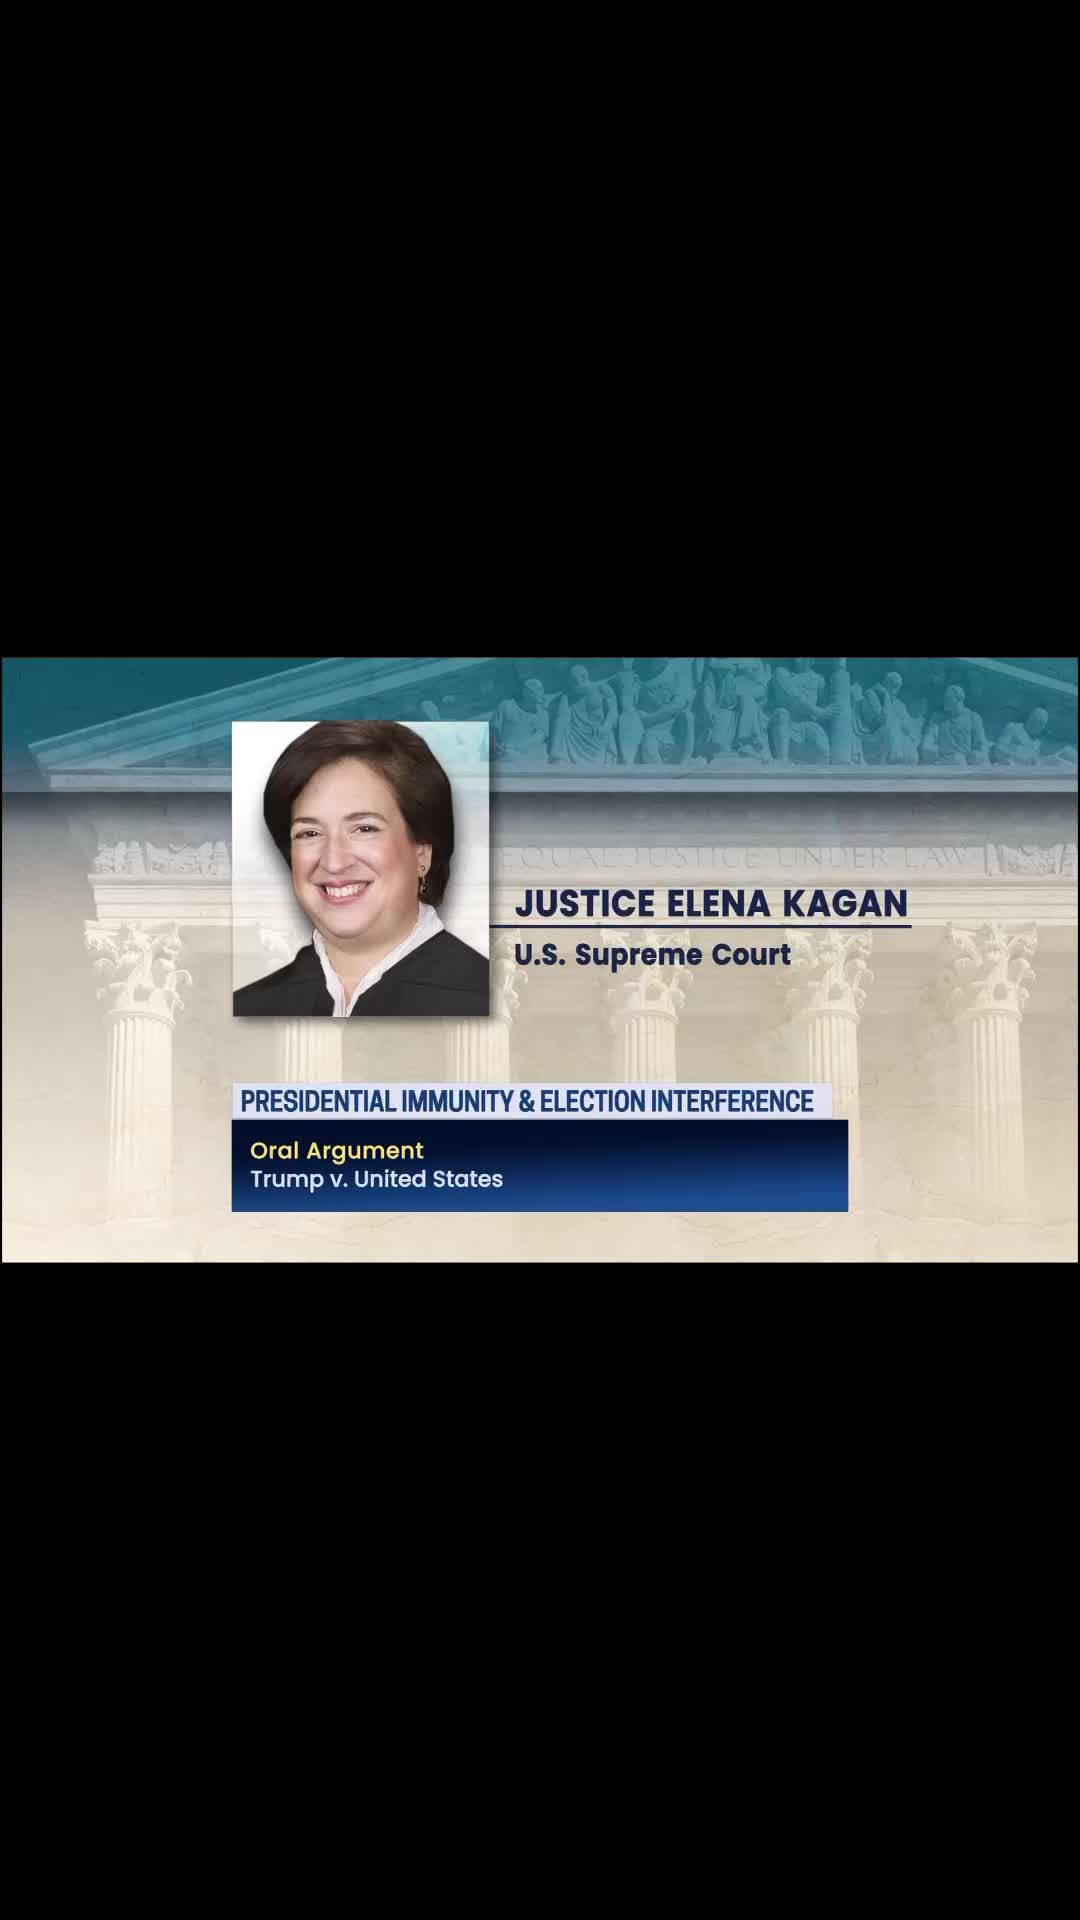 Justice Elena Kagan asked D. John Sauer, attorney for former President Trump, whether a president ordering the military to stage a coup to remain in office would be considered an official act and therefore not be subject to criminal prosecution.   “Let’s say this president who ordered the military to stage a coup — he’s no longer president, he wasn’t impeached, he couldn’t be impeached, but he ordered the military to stage a coup. And you’re saying that’s an official act? That’s immune?” she asked.   “I think it would depend on the circumstances whether it was an official act,” Mr. Sauer replied. “If it’s an official act, there needs to be impeachment and conviction beforehand.”   The case s